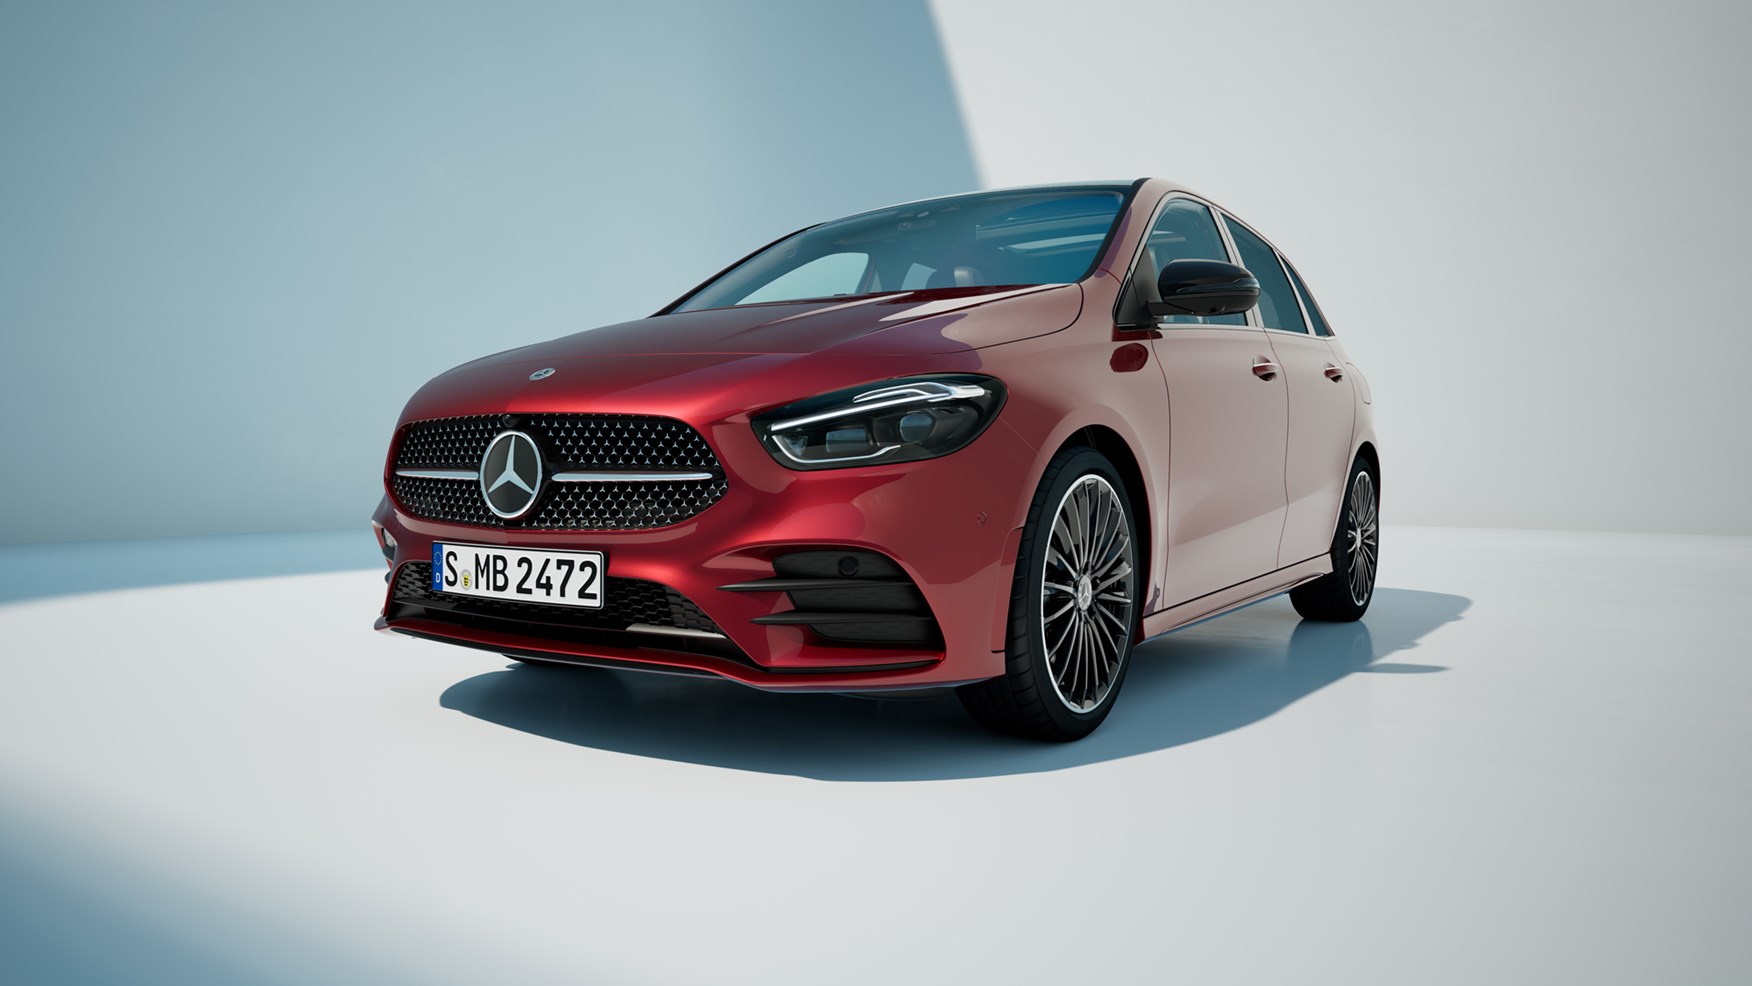 Mercedes-Benz B200 Sport is not quite there yet